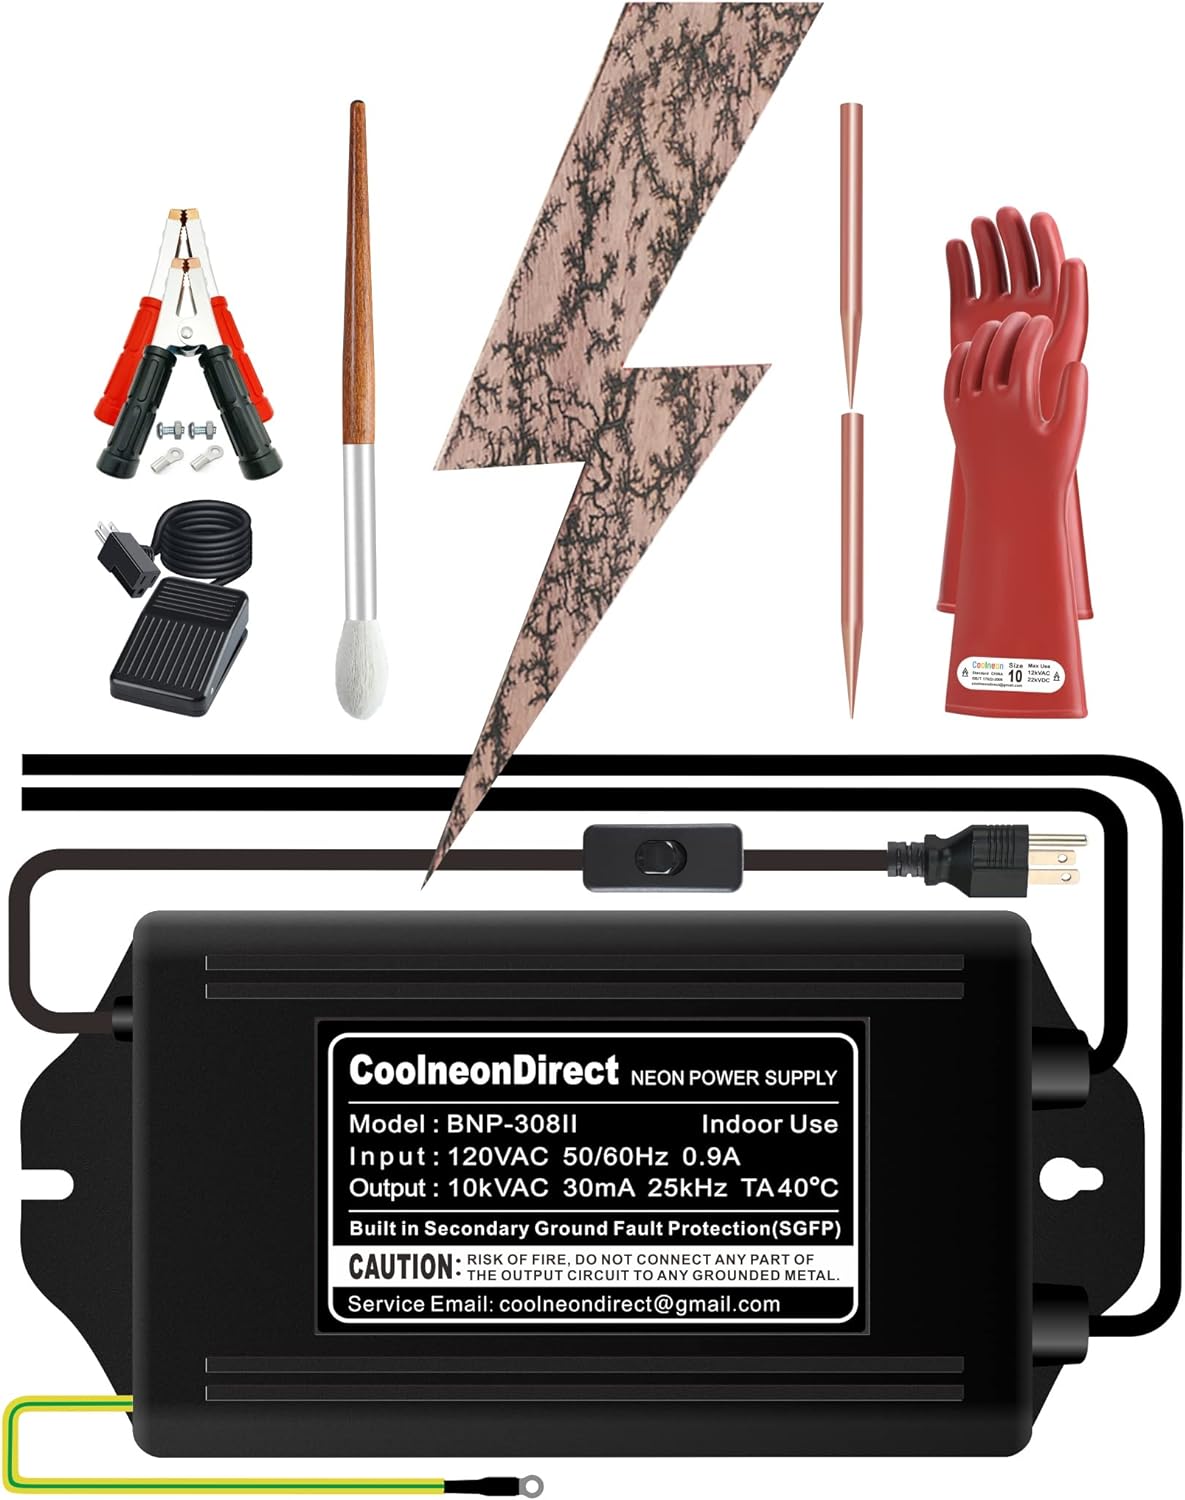 Coolneon Lichtenberg Machine Kit,Neon Sign Transformer+Rods+Clamps+Brush+Gloves+Foot Switch,Fractal Wood Burning Machine Set,Not Led Neo